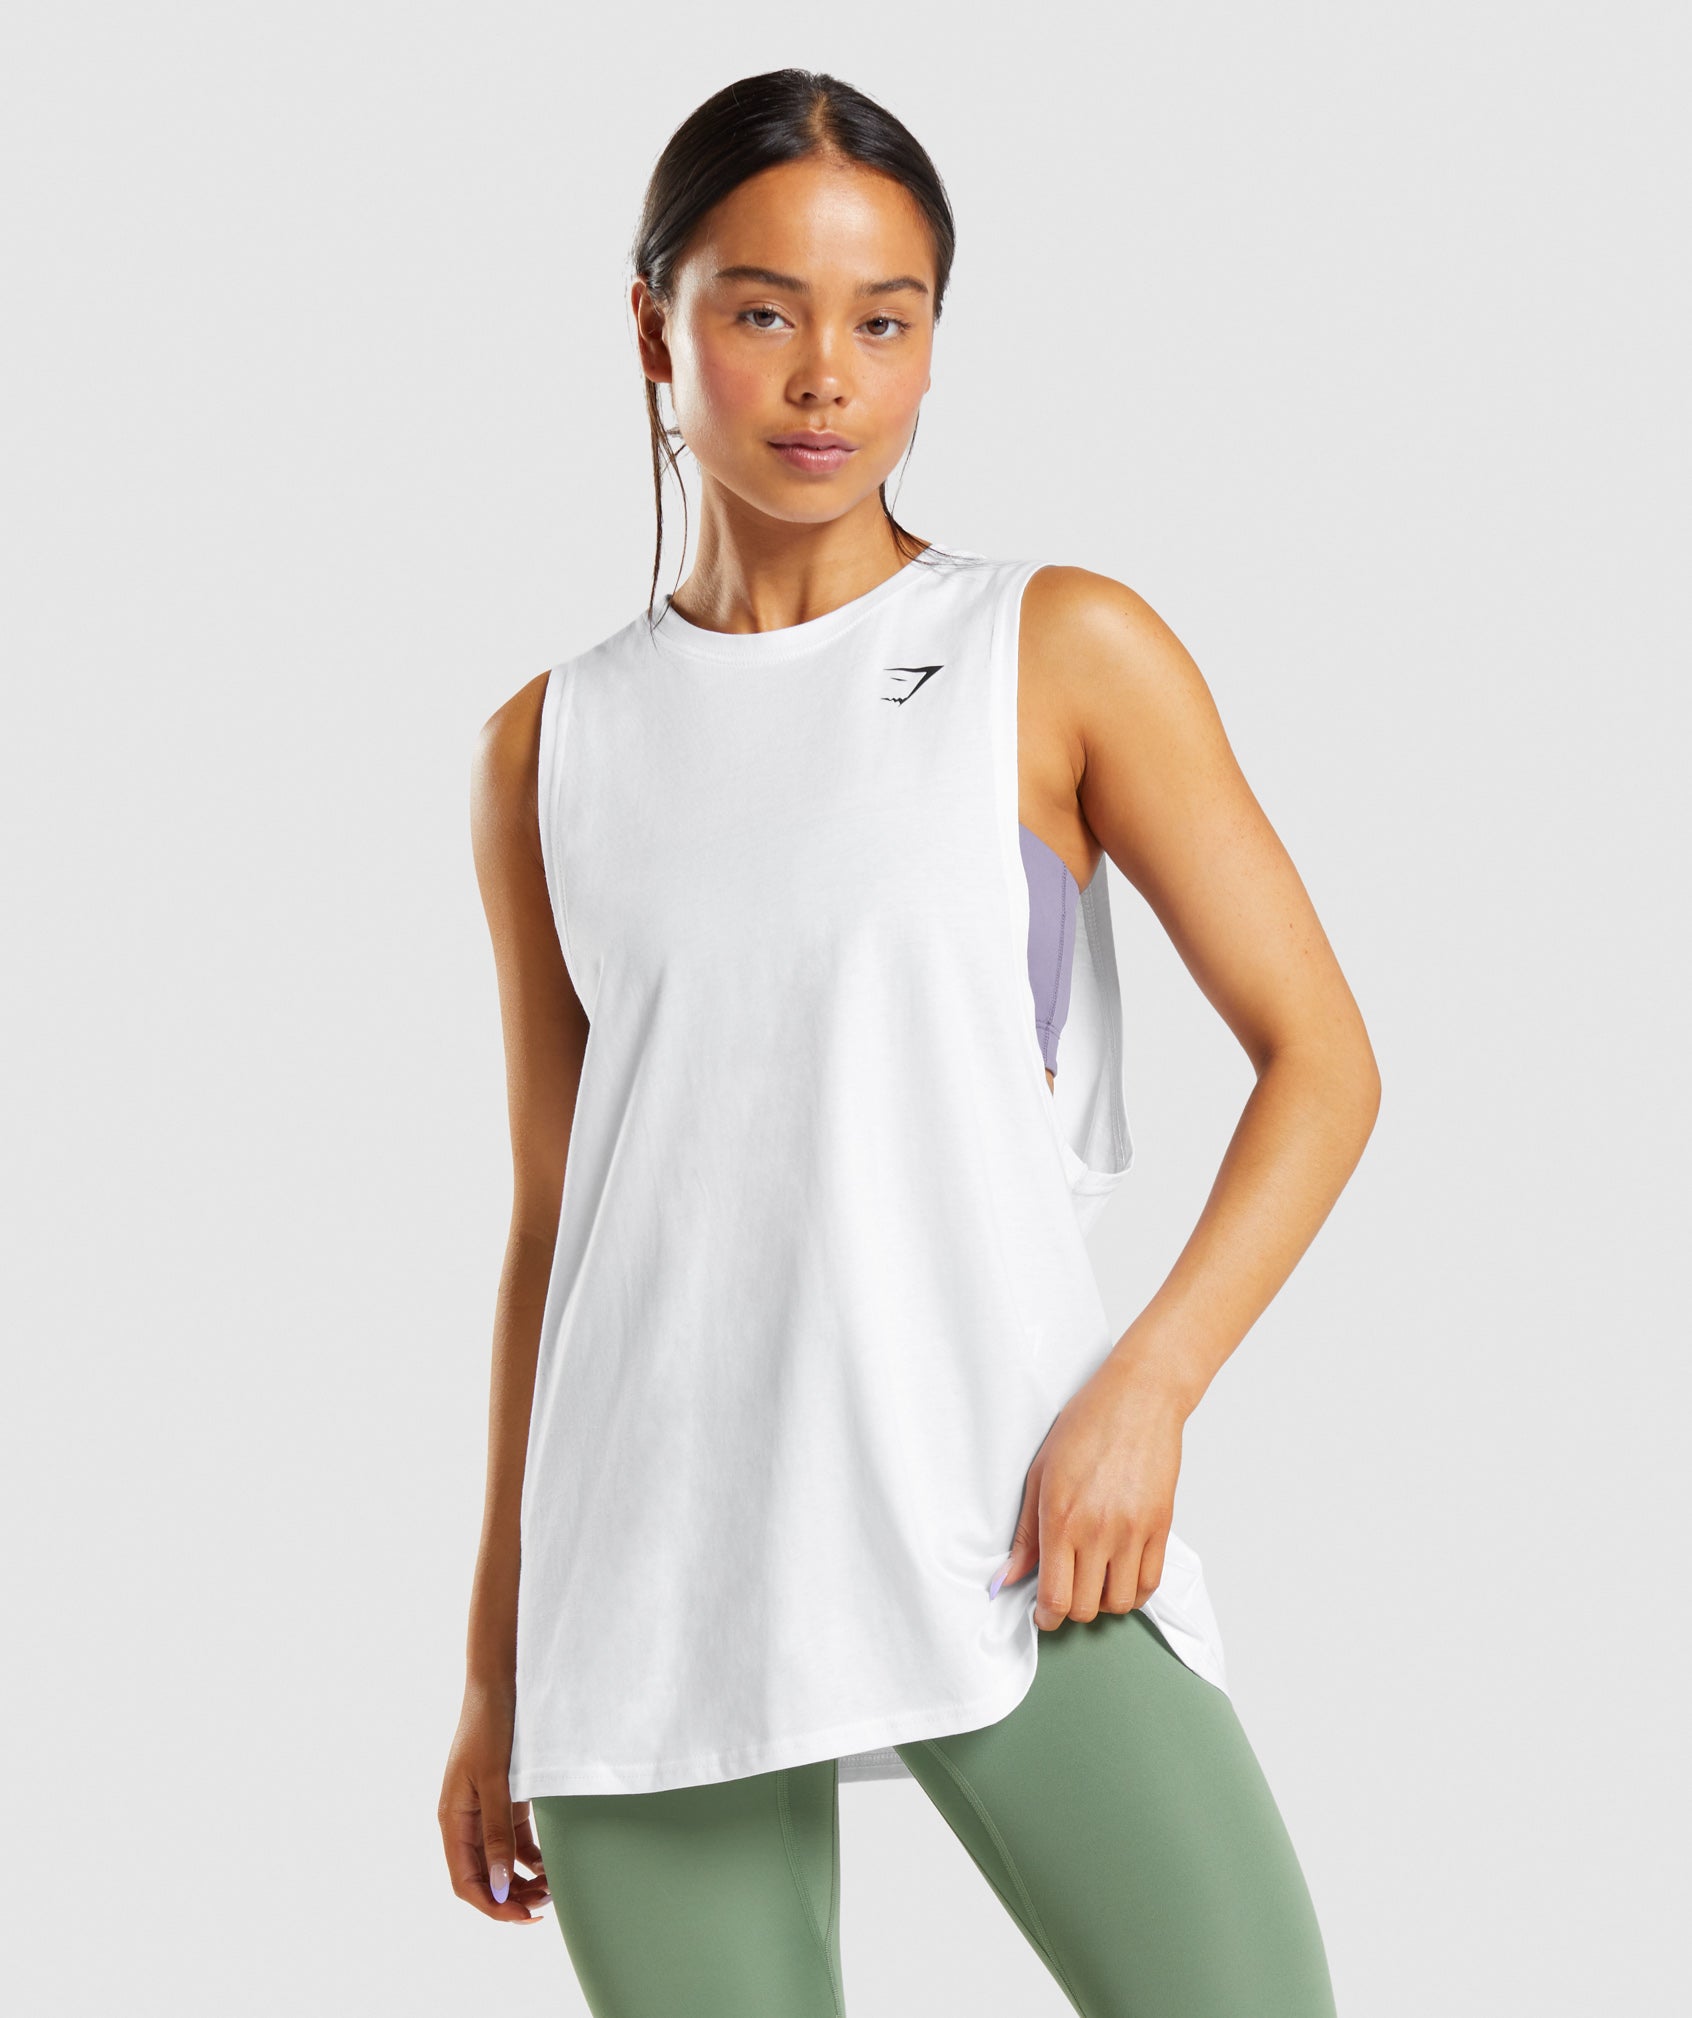 Training Tank in {{variantColor} is out of stock